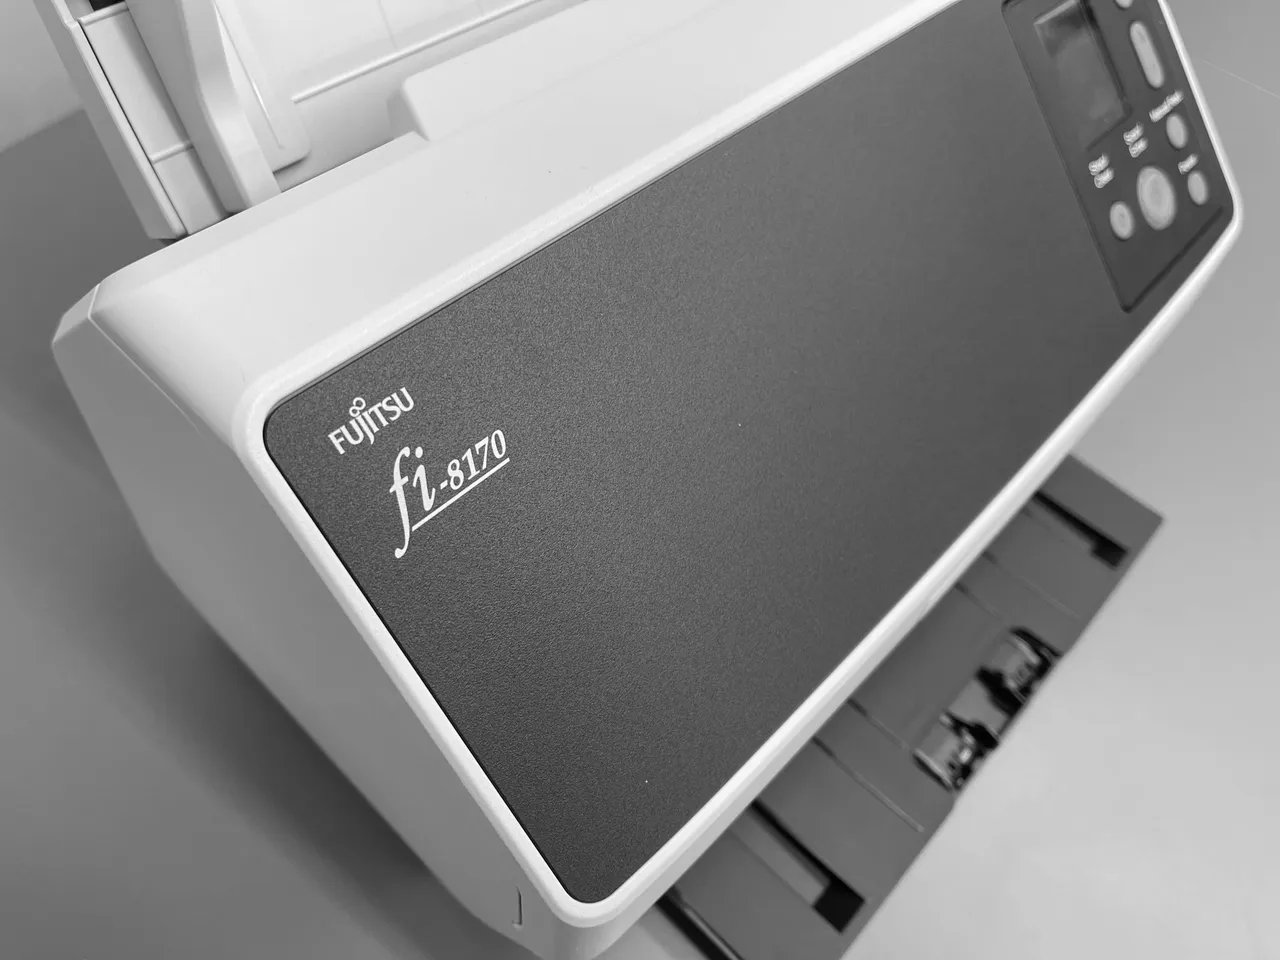 What Can the FI-8170 Scanner Do for Your Office?